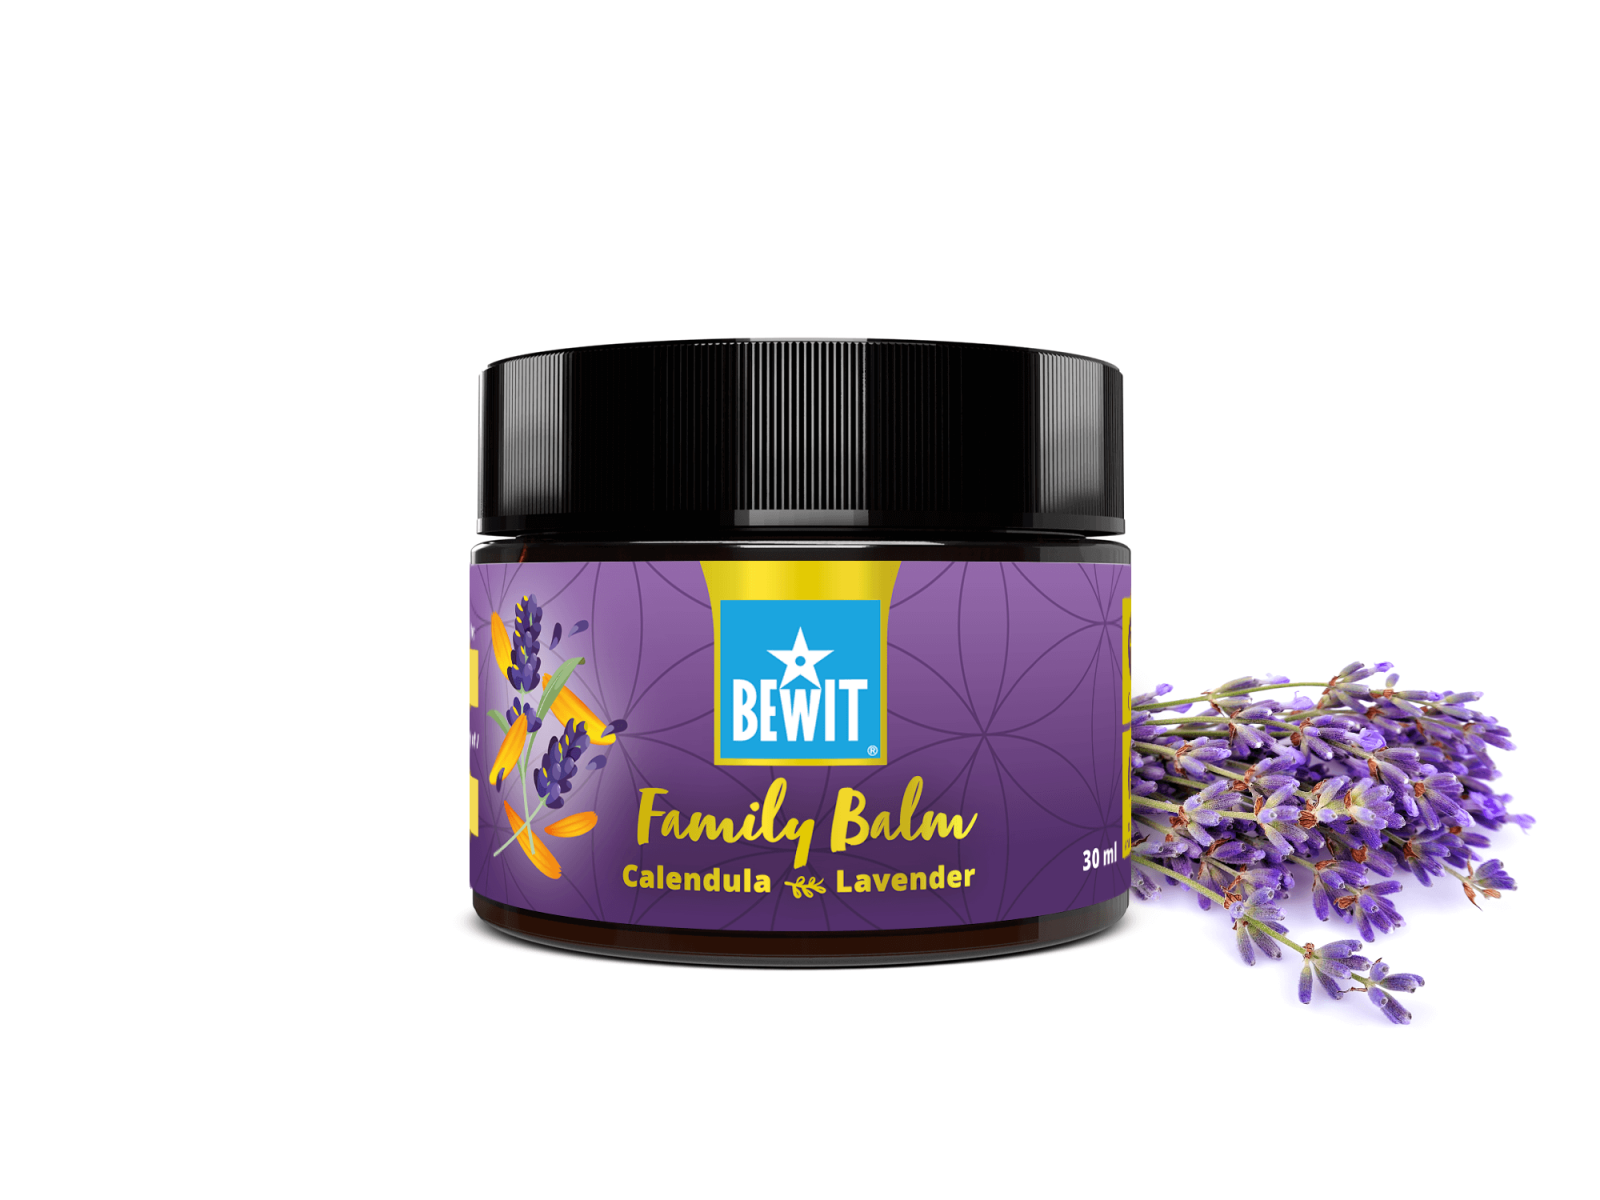 BEWIT FAMILY BALM CALENDULA AND LAVENDER - CARING BALM FOR THE WHOLE FAMILY - 2